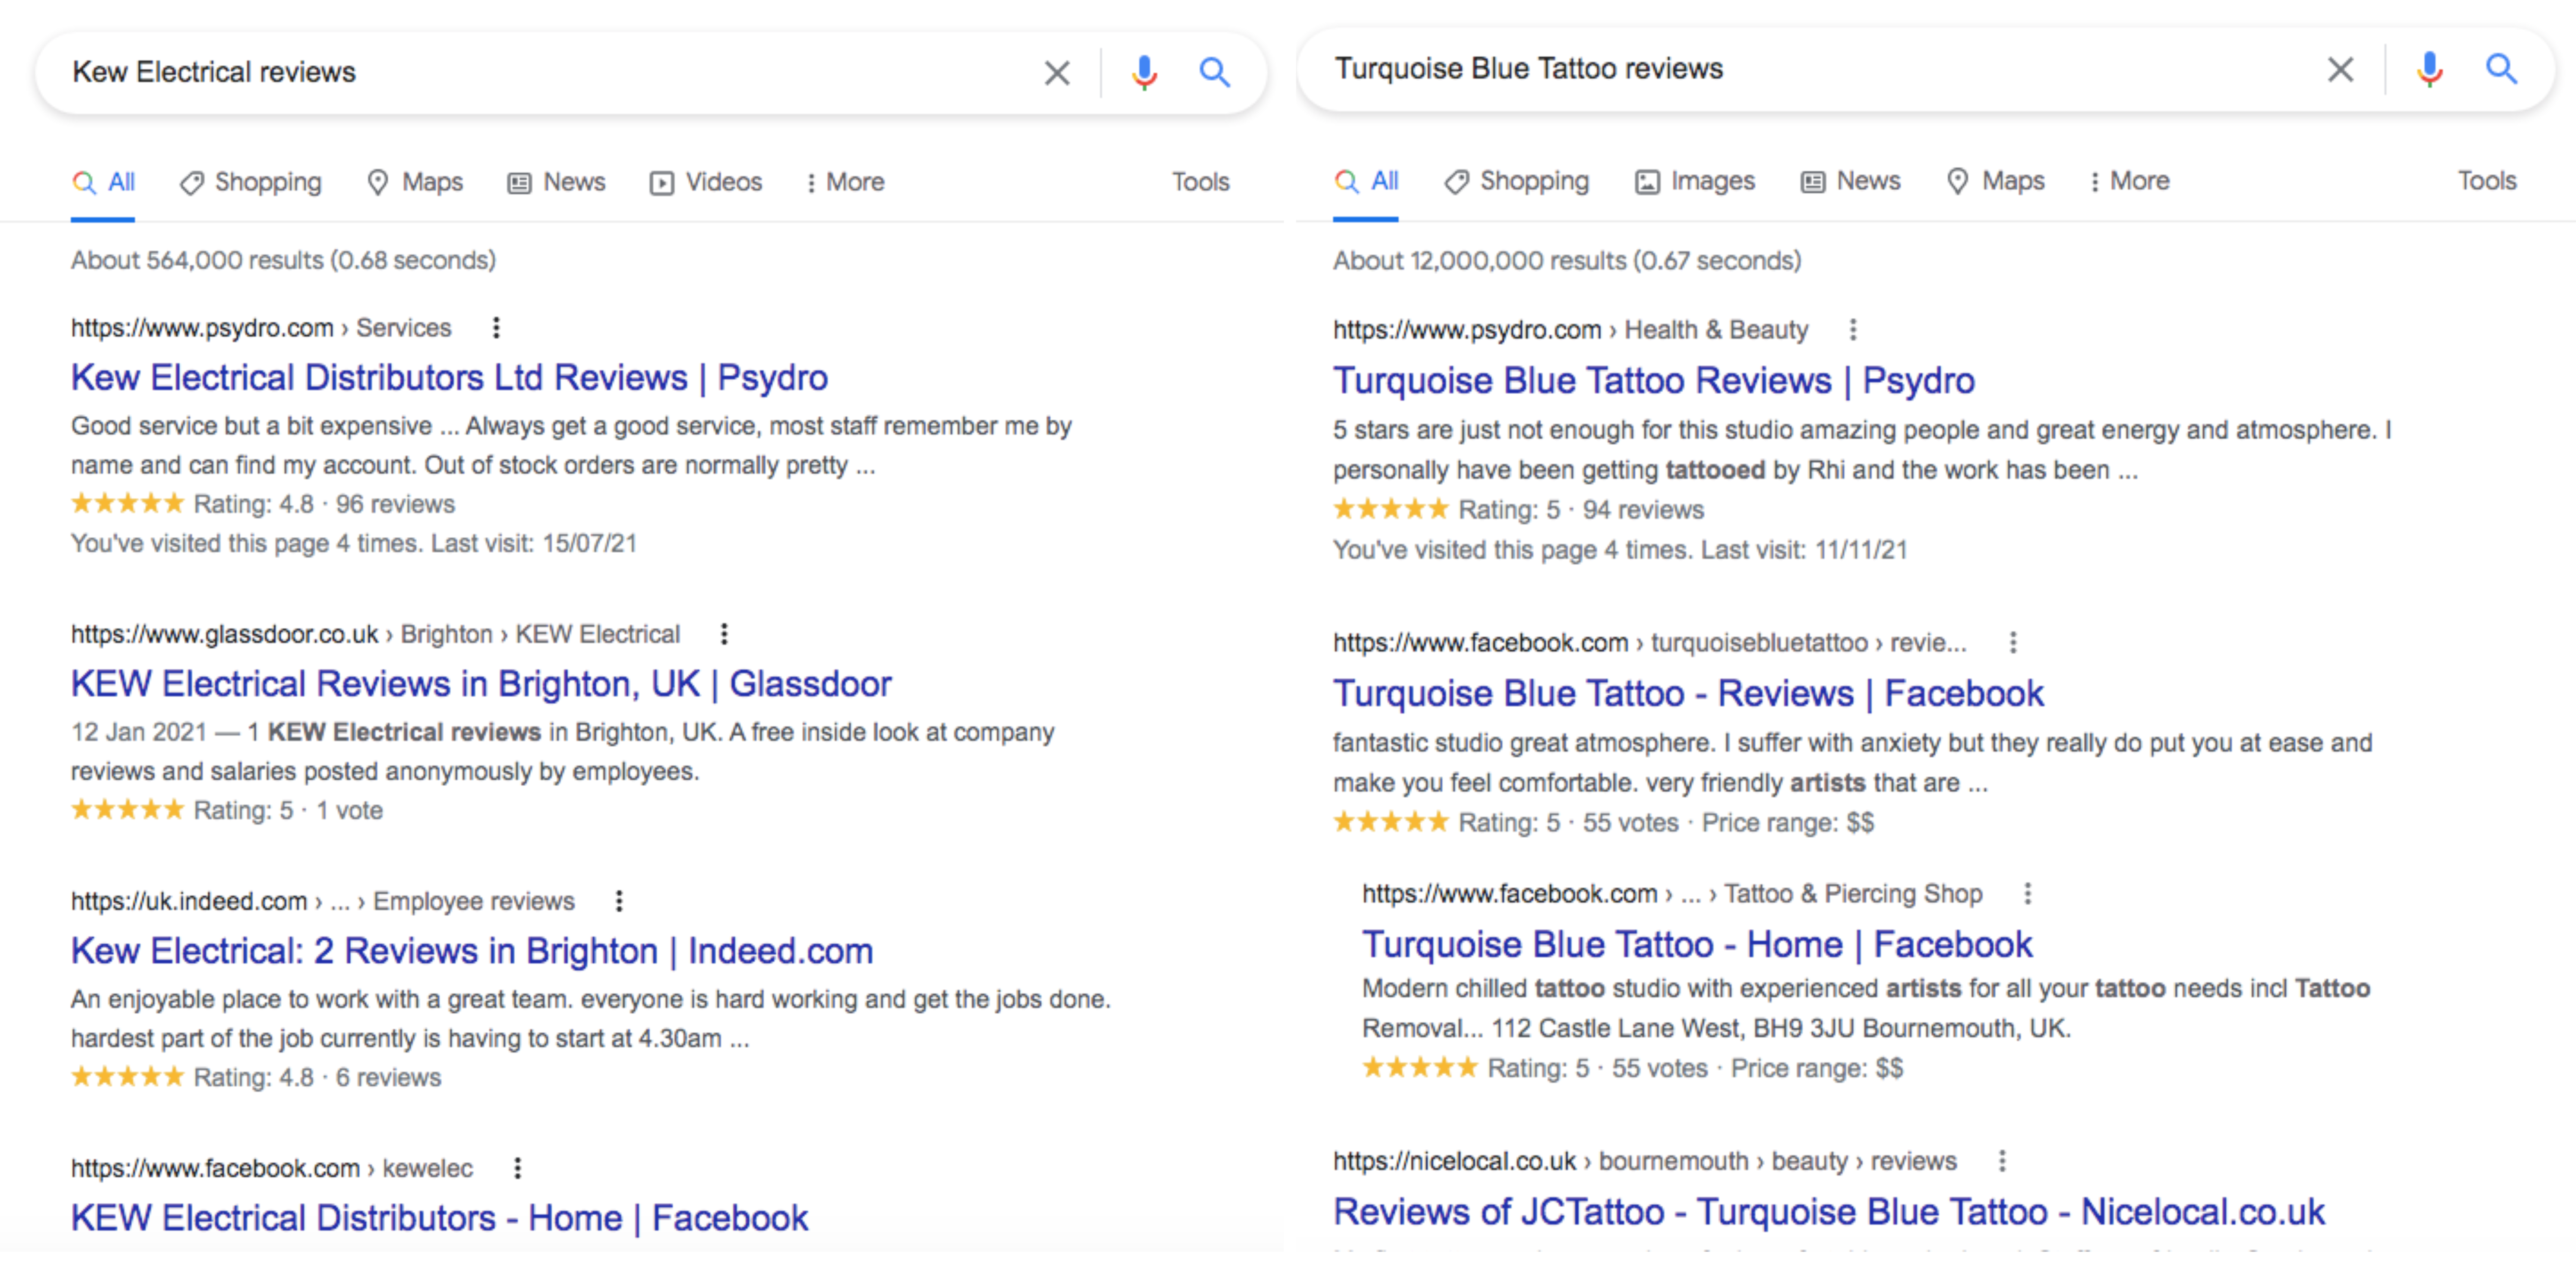 Image showing the search engine ranking of Kew Electrical and Turquoise Blue Tattoo when searching for the company’s reviews. The first listing is their Psydro reviews page. 